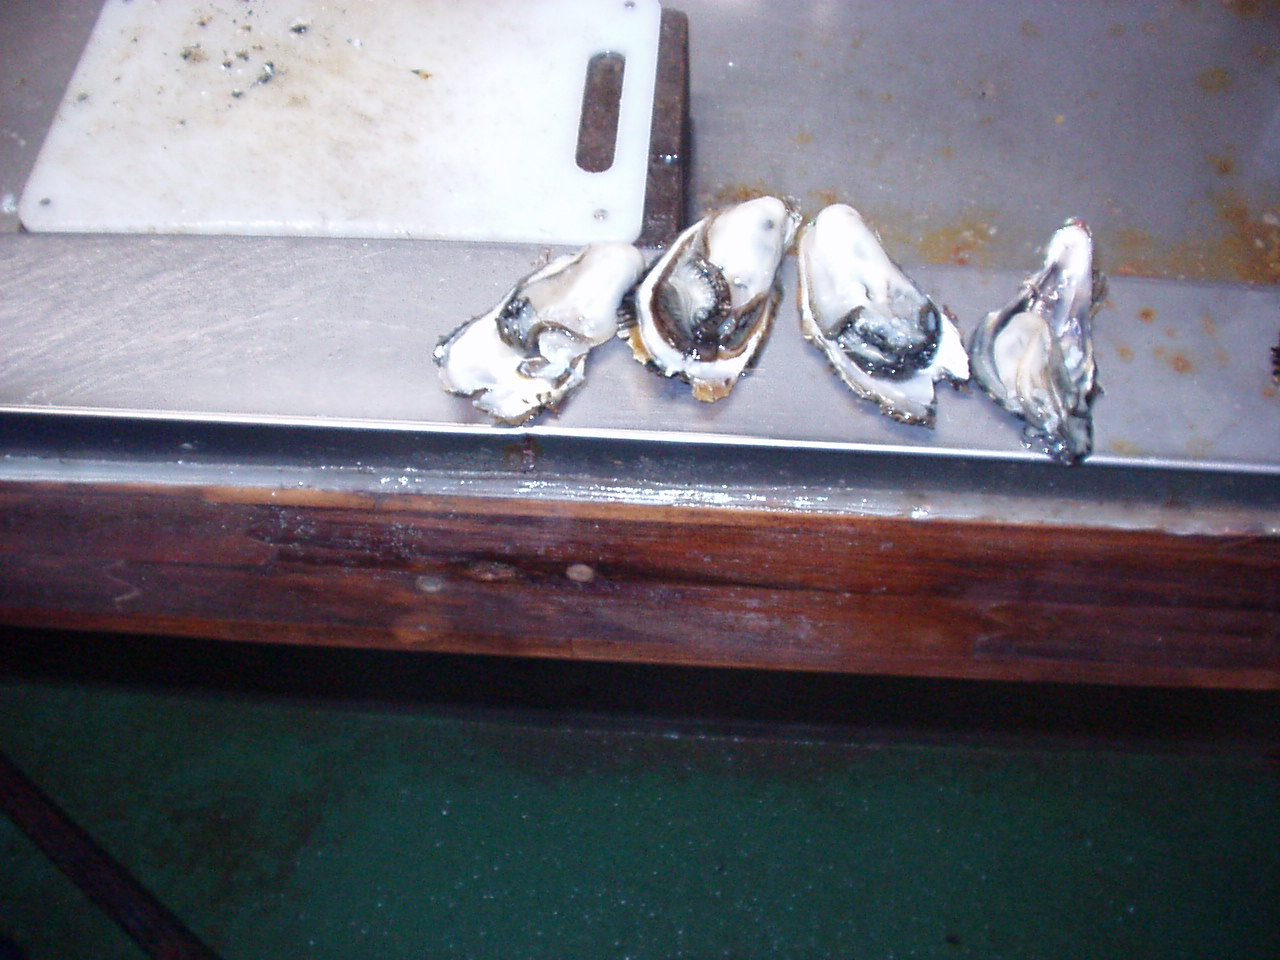 Half-shell oysters showing good size from an aquaculture farm in Japan